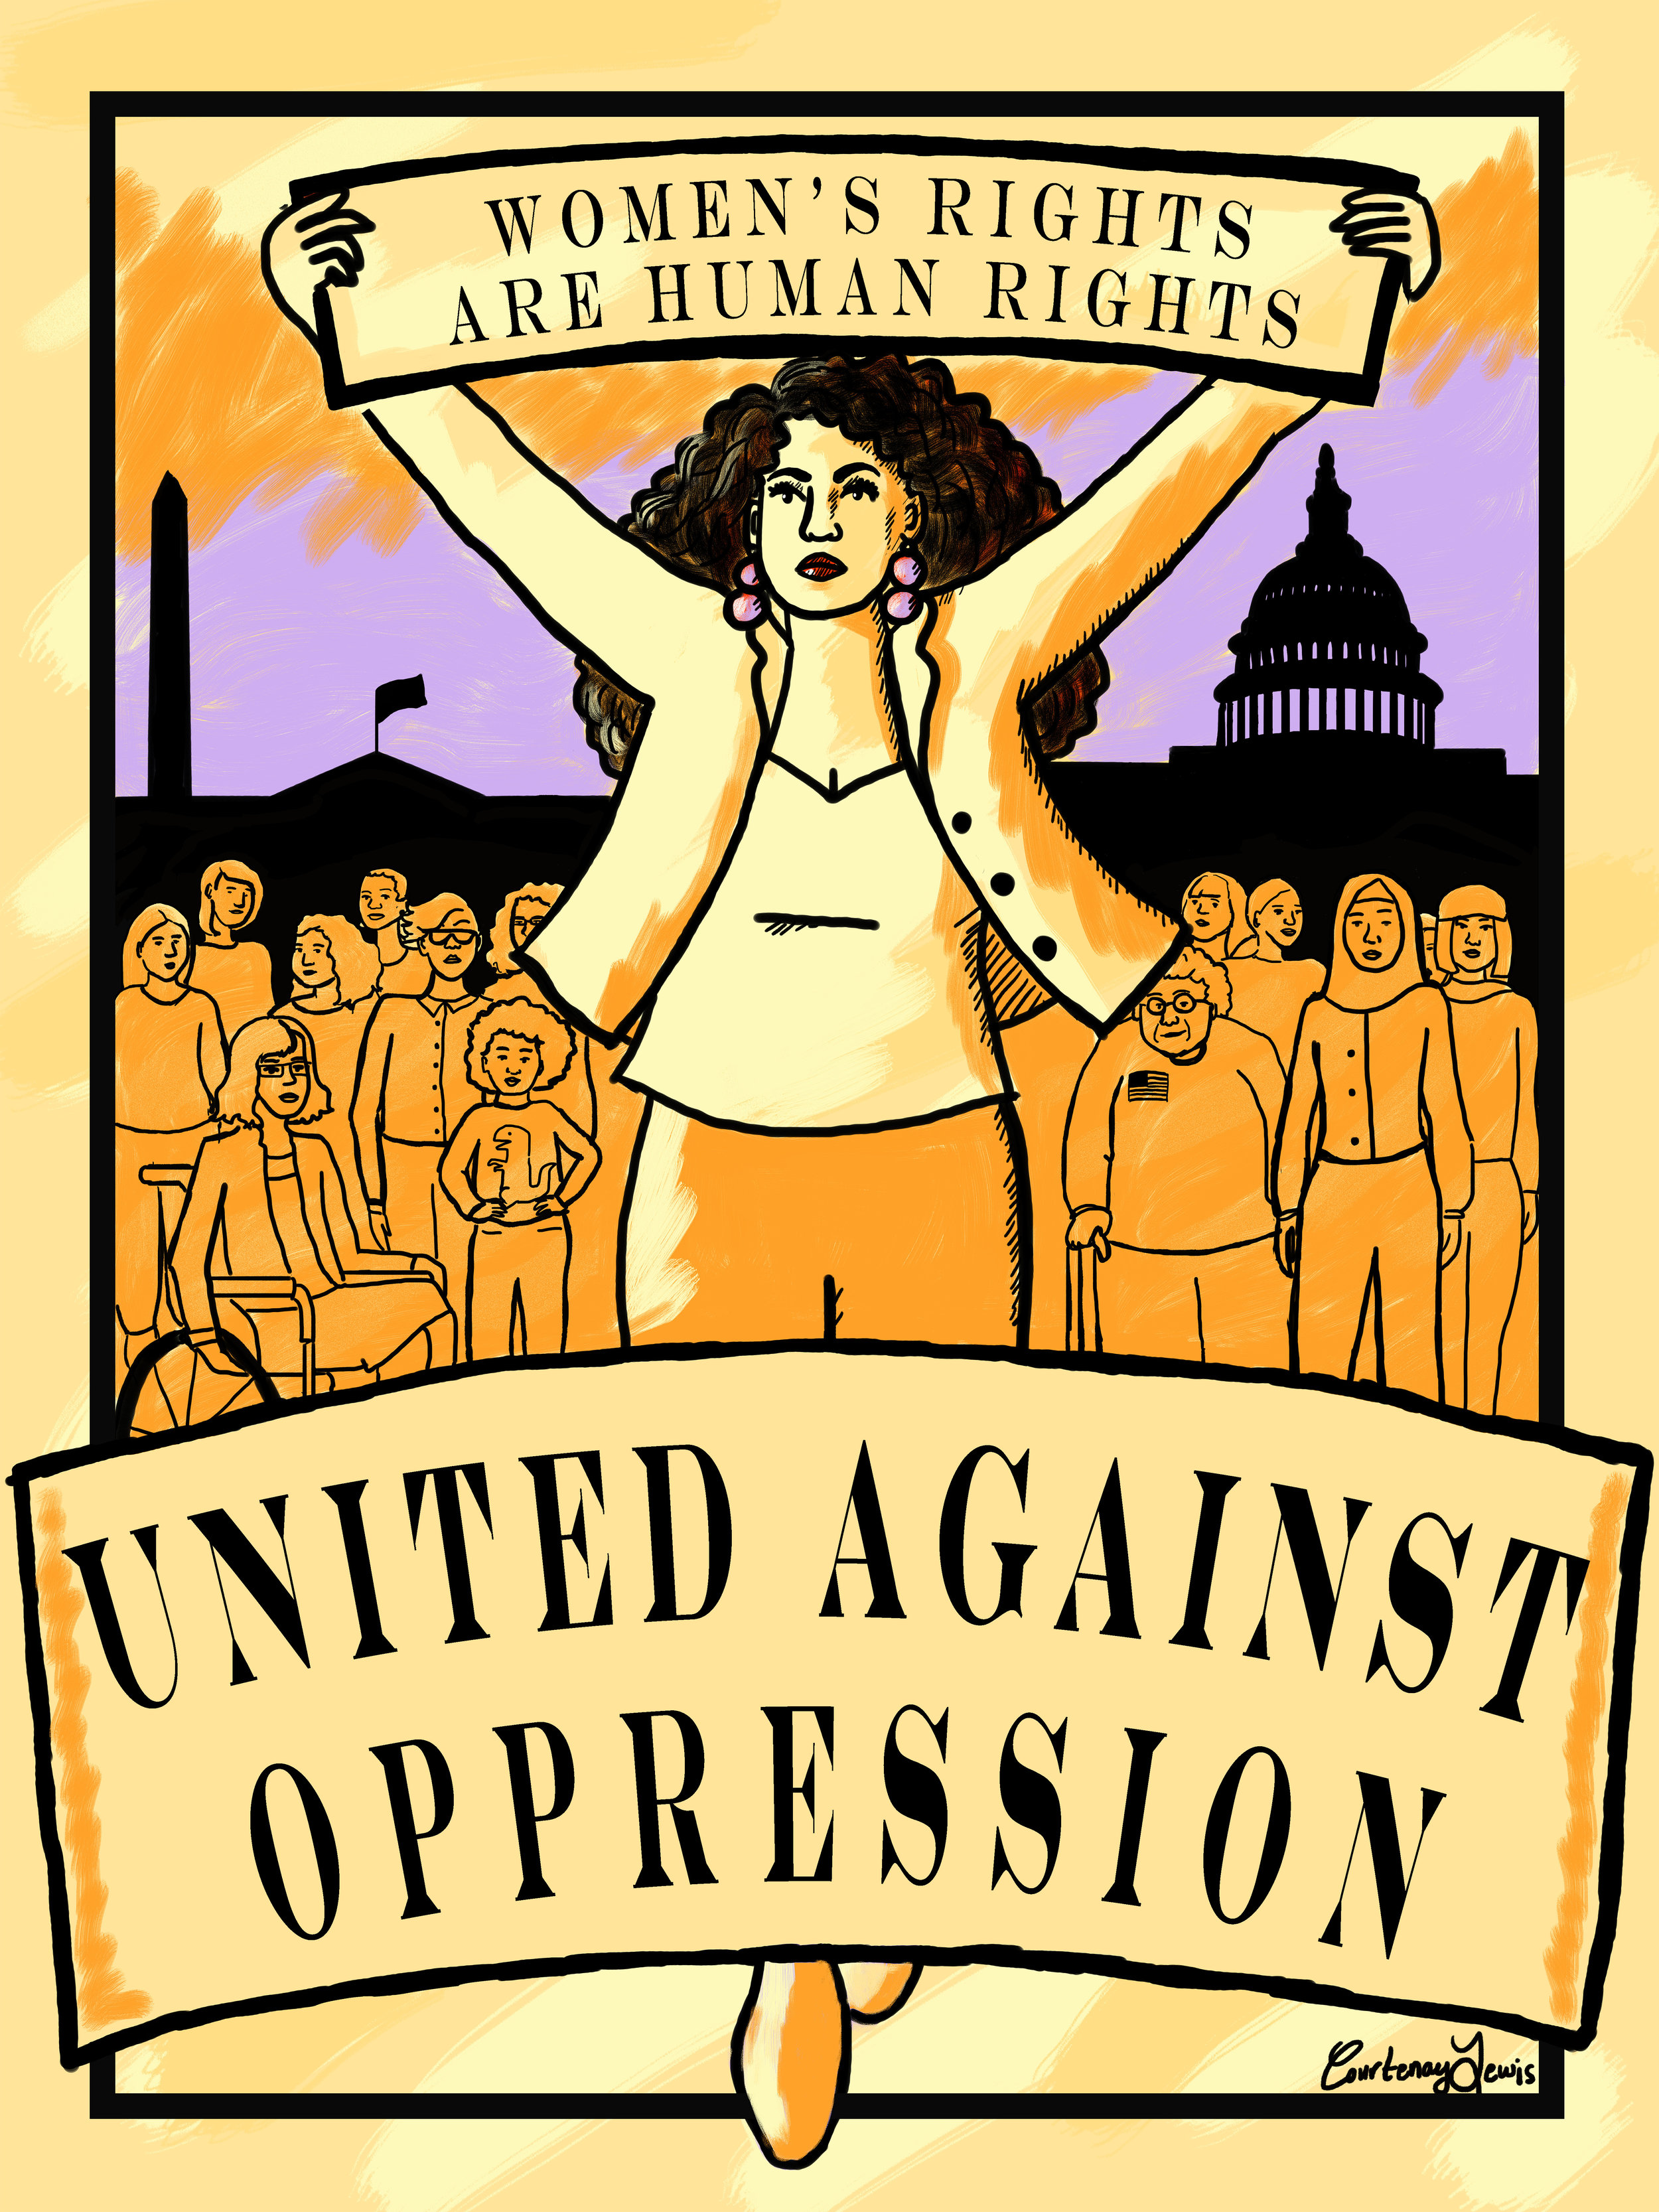 Poster selected for the Amplifier Foundation's "Hear Our Voice" exhibition celebrating the Women's March on Washington (2017)